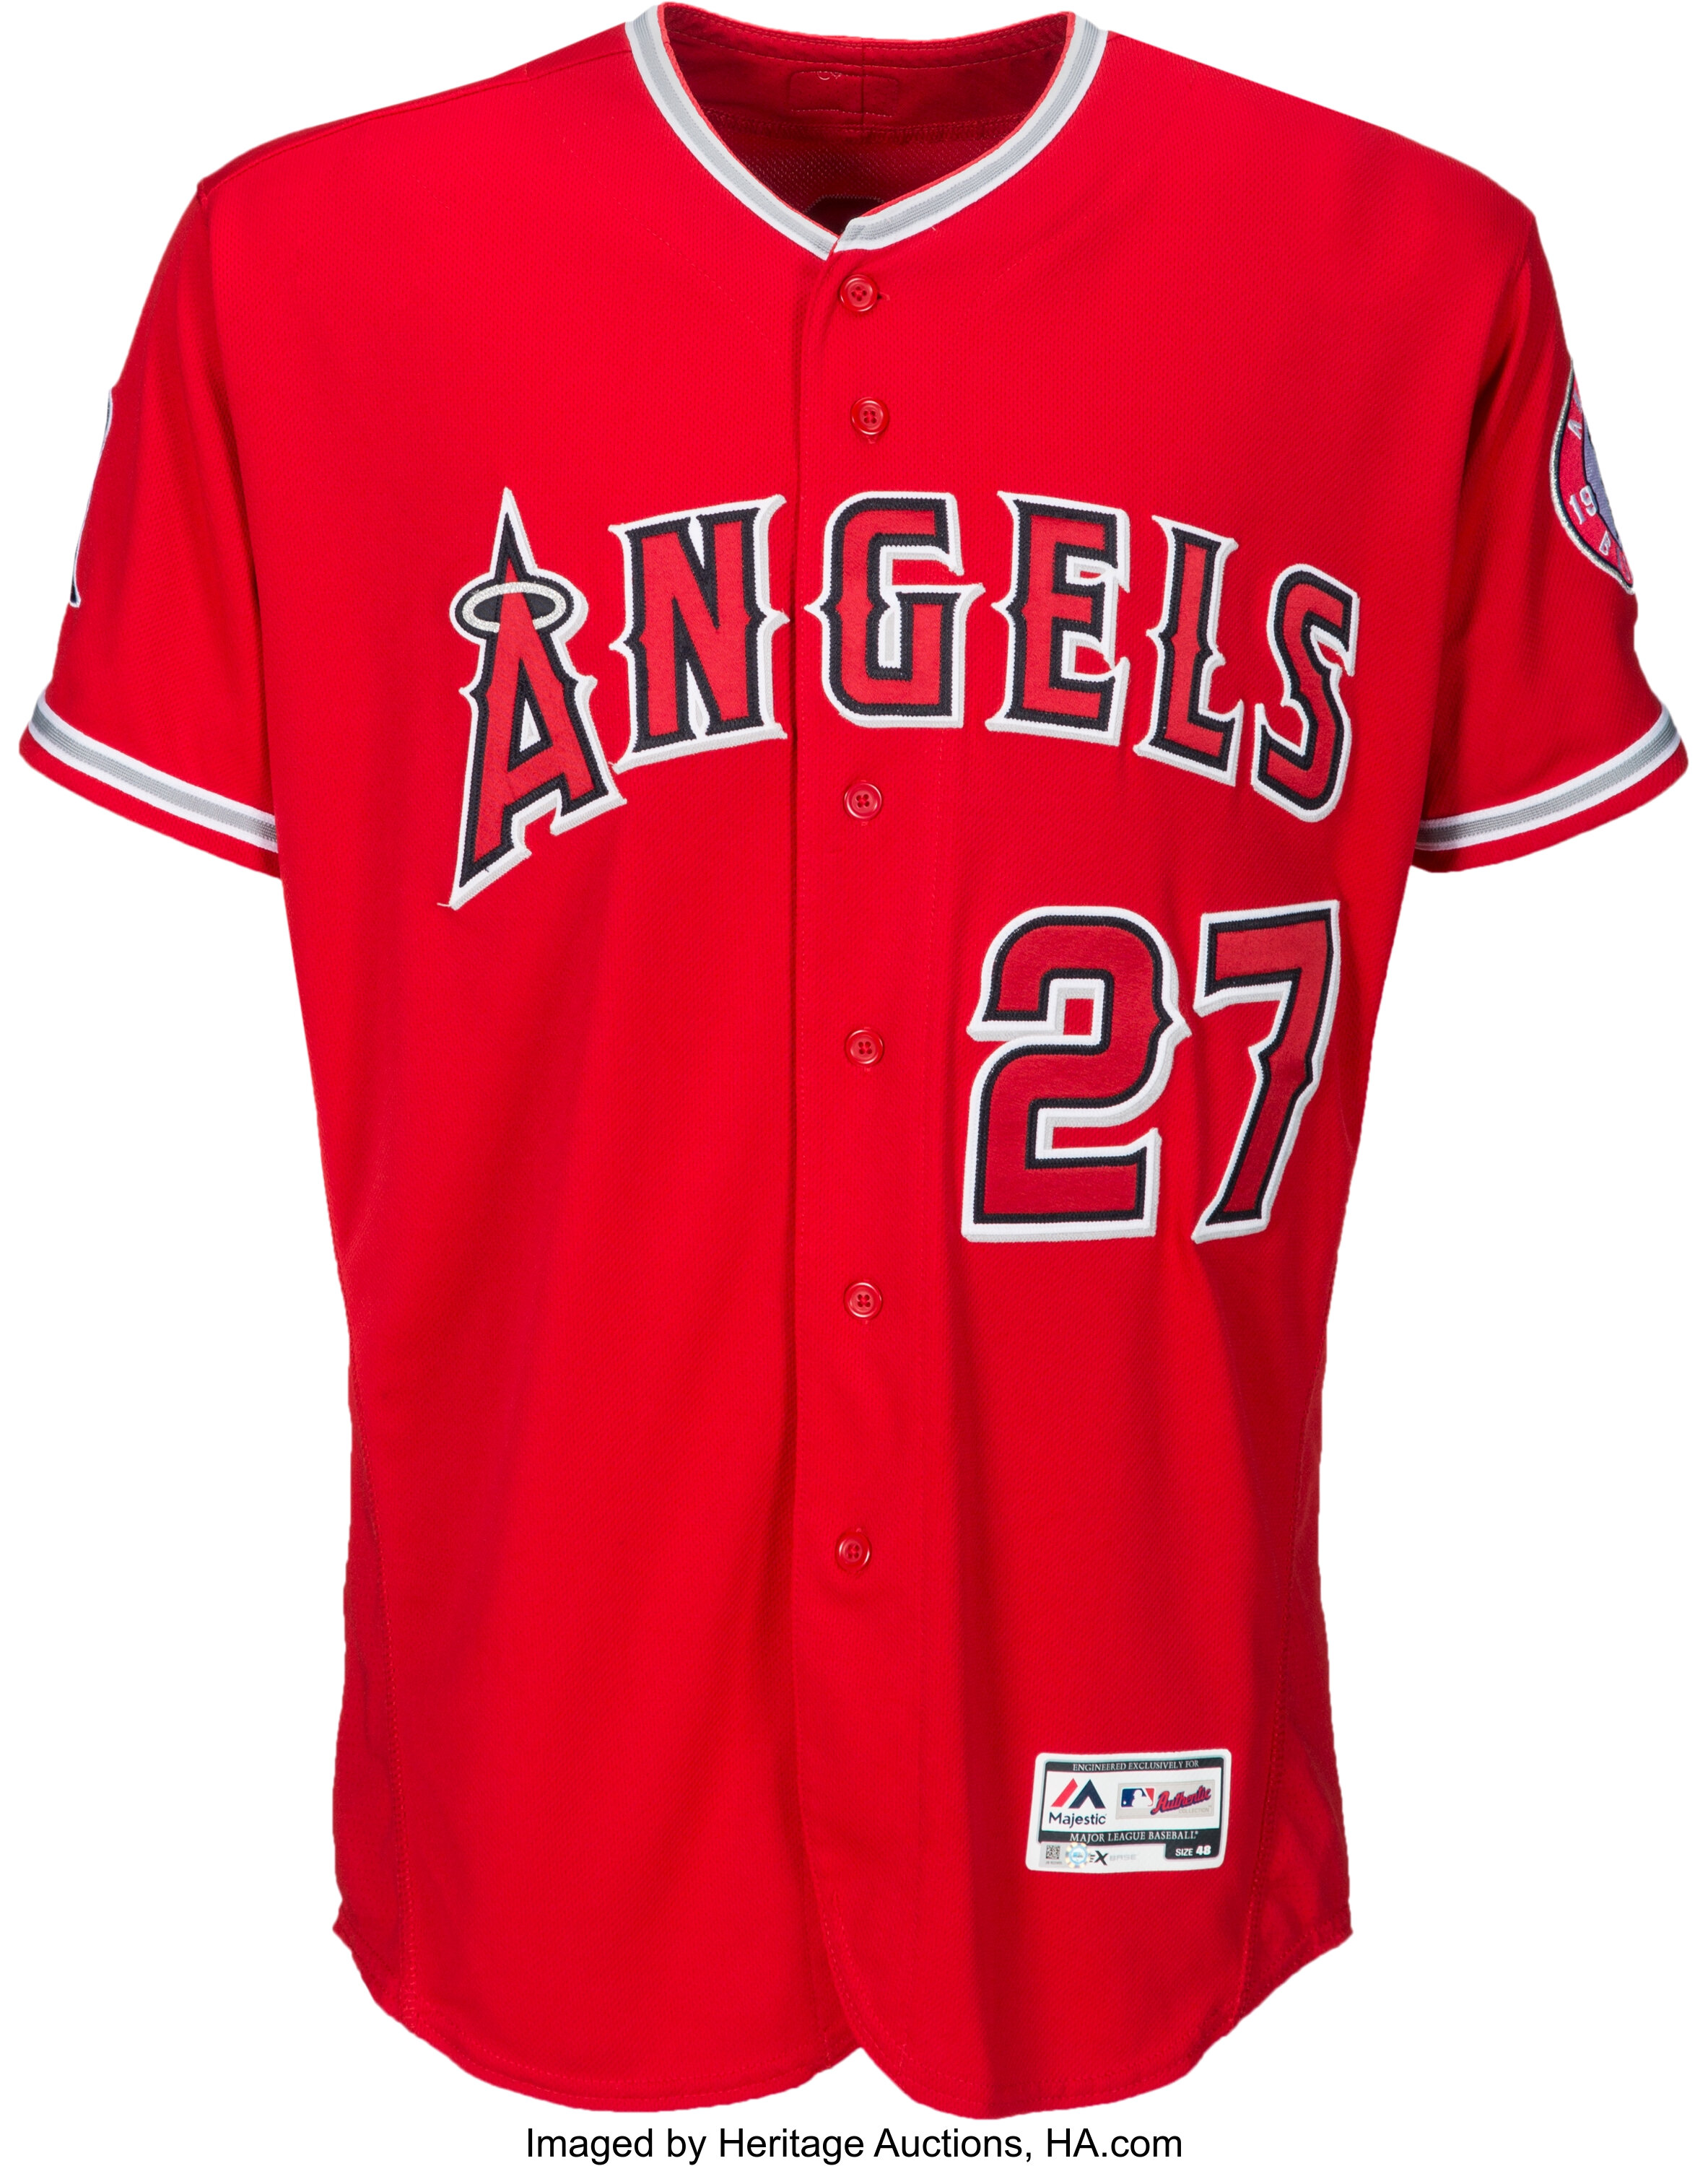 Mike Trout Game-Used Jersey